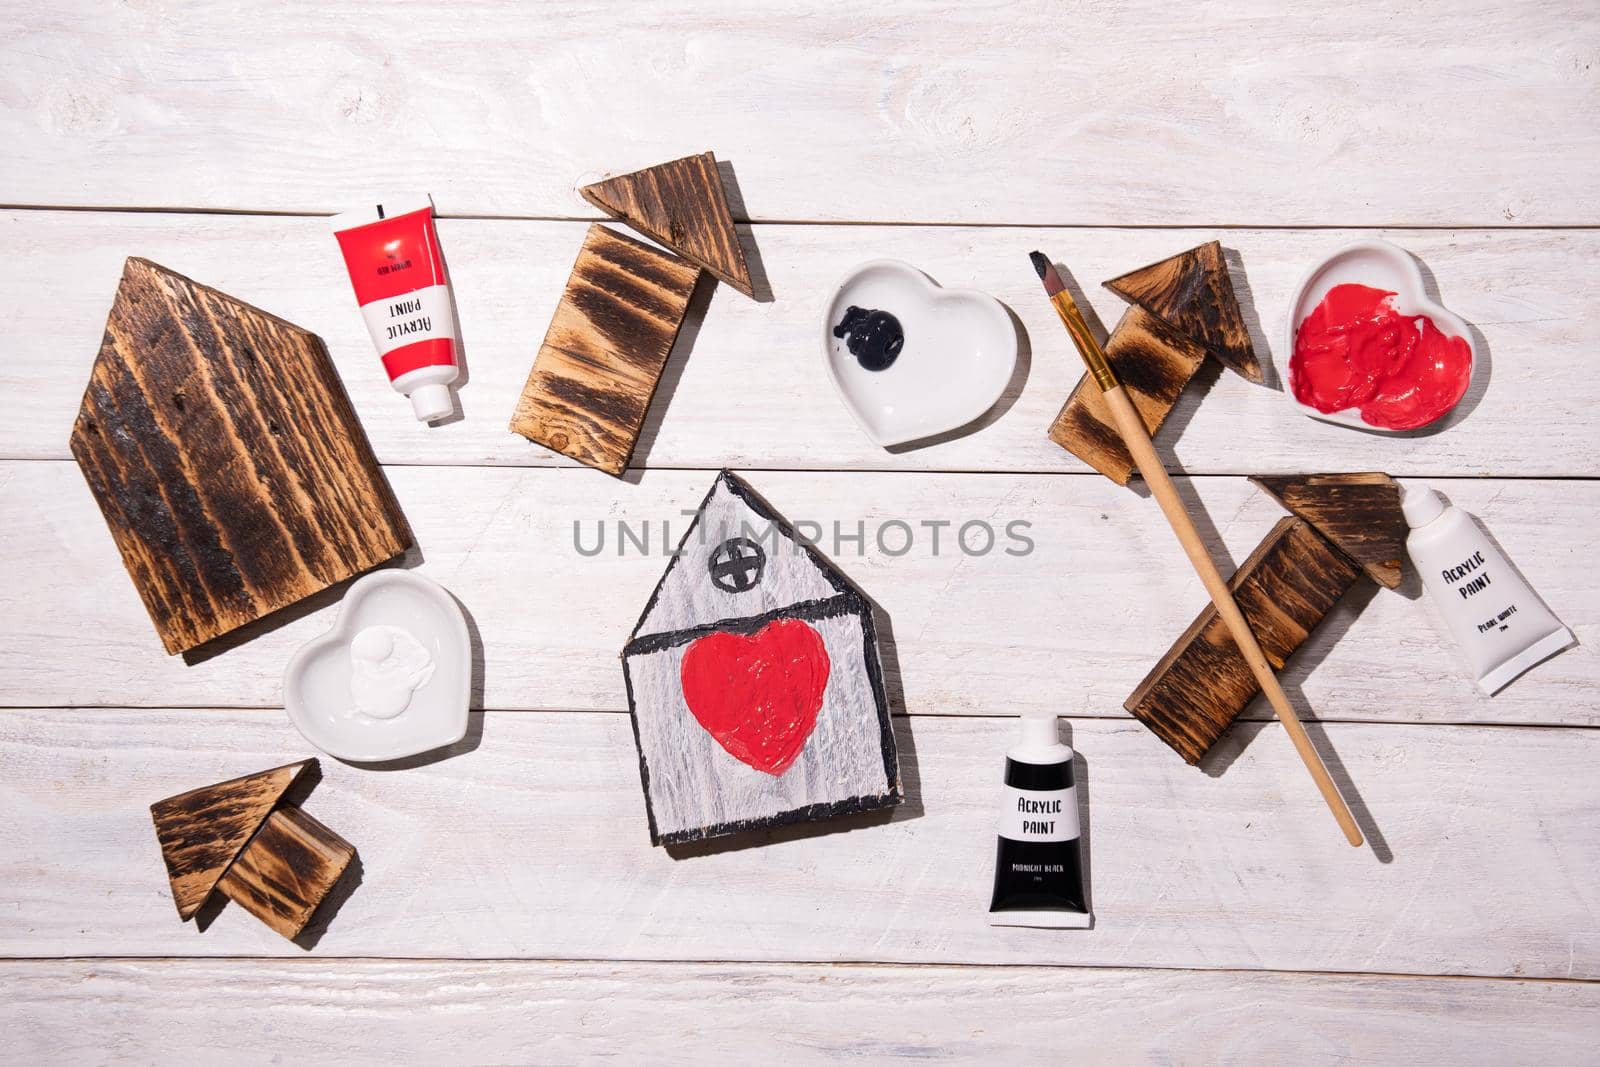 how to draw a heart on a wooden house, crafting, step by step instructions by KaterinaDalemans